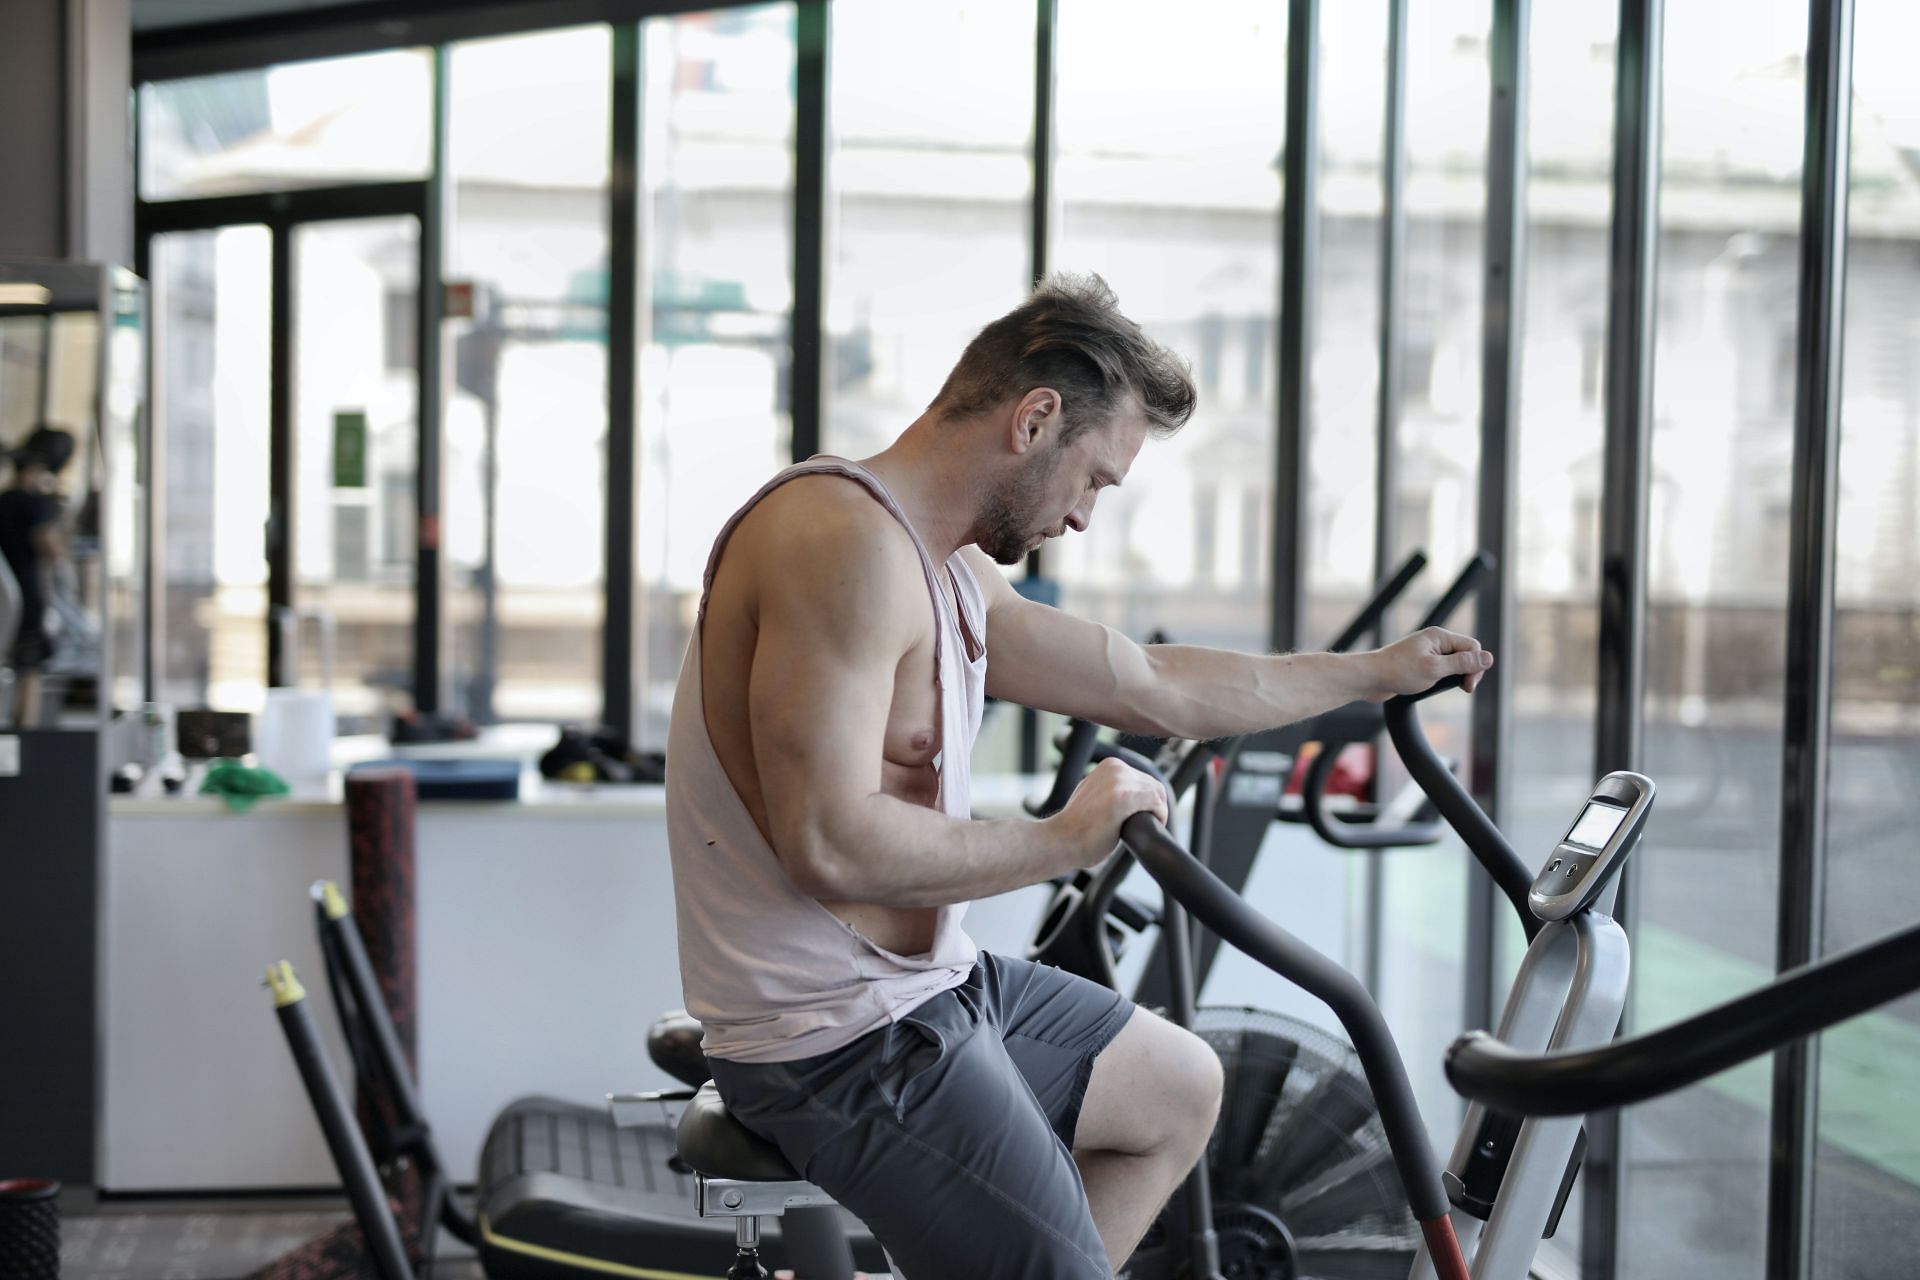 An elliptical trainer can be found in the gym or you can get it for your home. (Image via Pexels/ mAndrea Piacquadio)